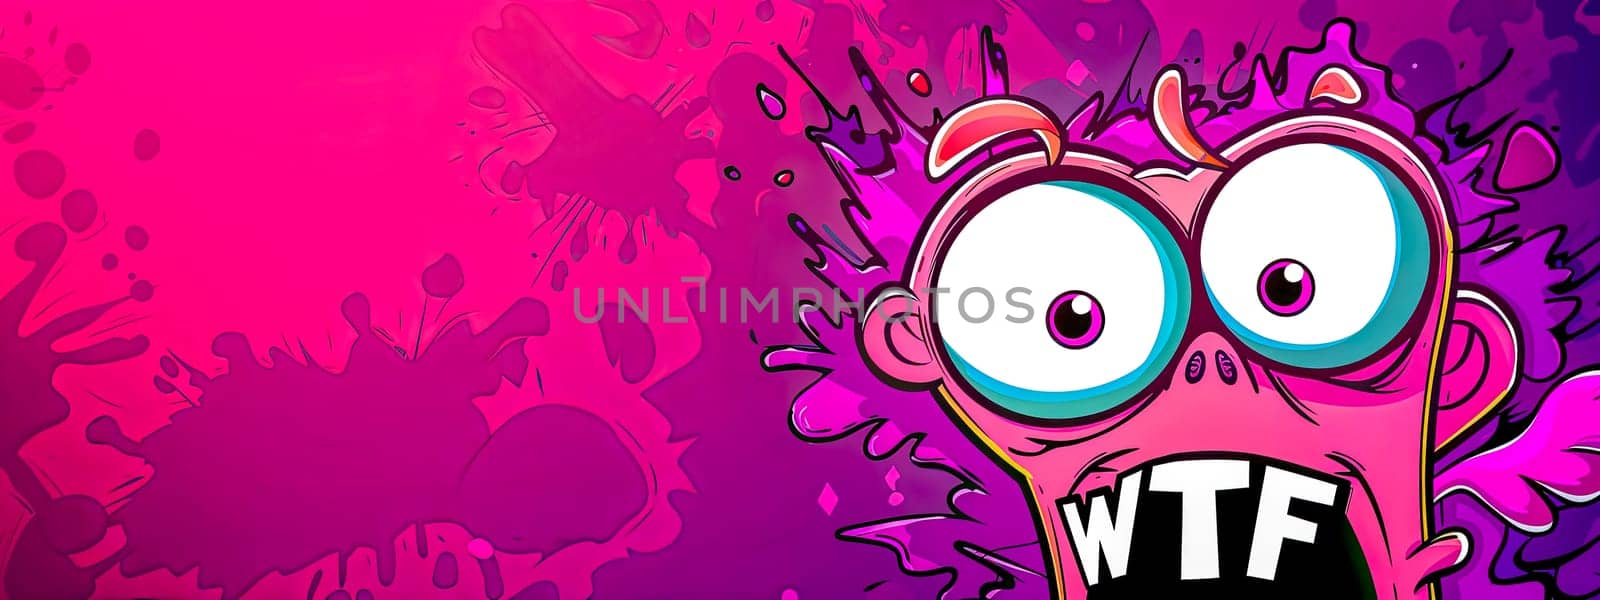 Colorful illustration of a surprised cartoon creature with a comical wtf sign on a vibrant pink splash backdrop